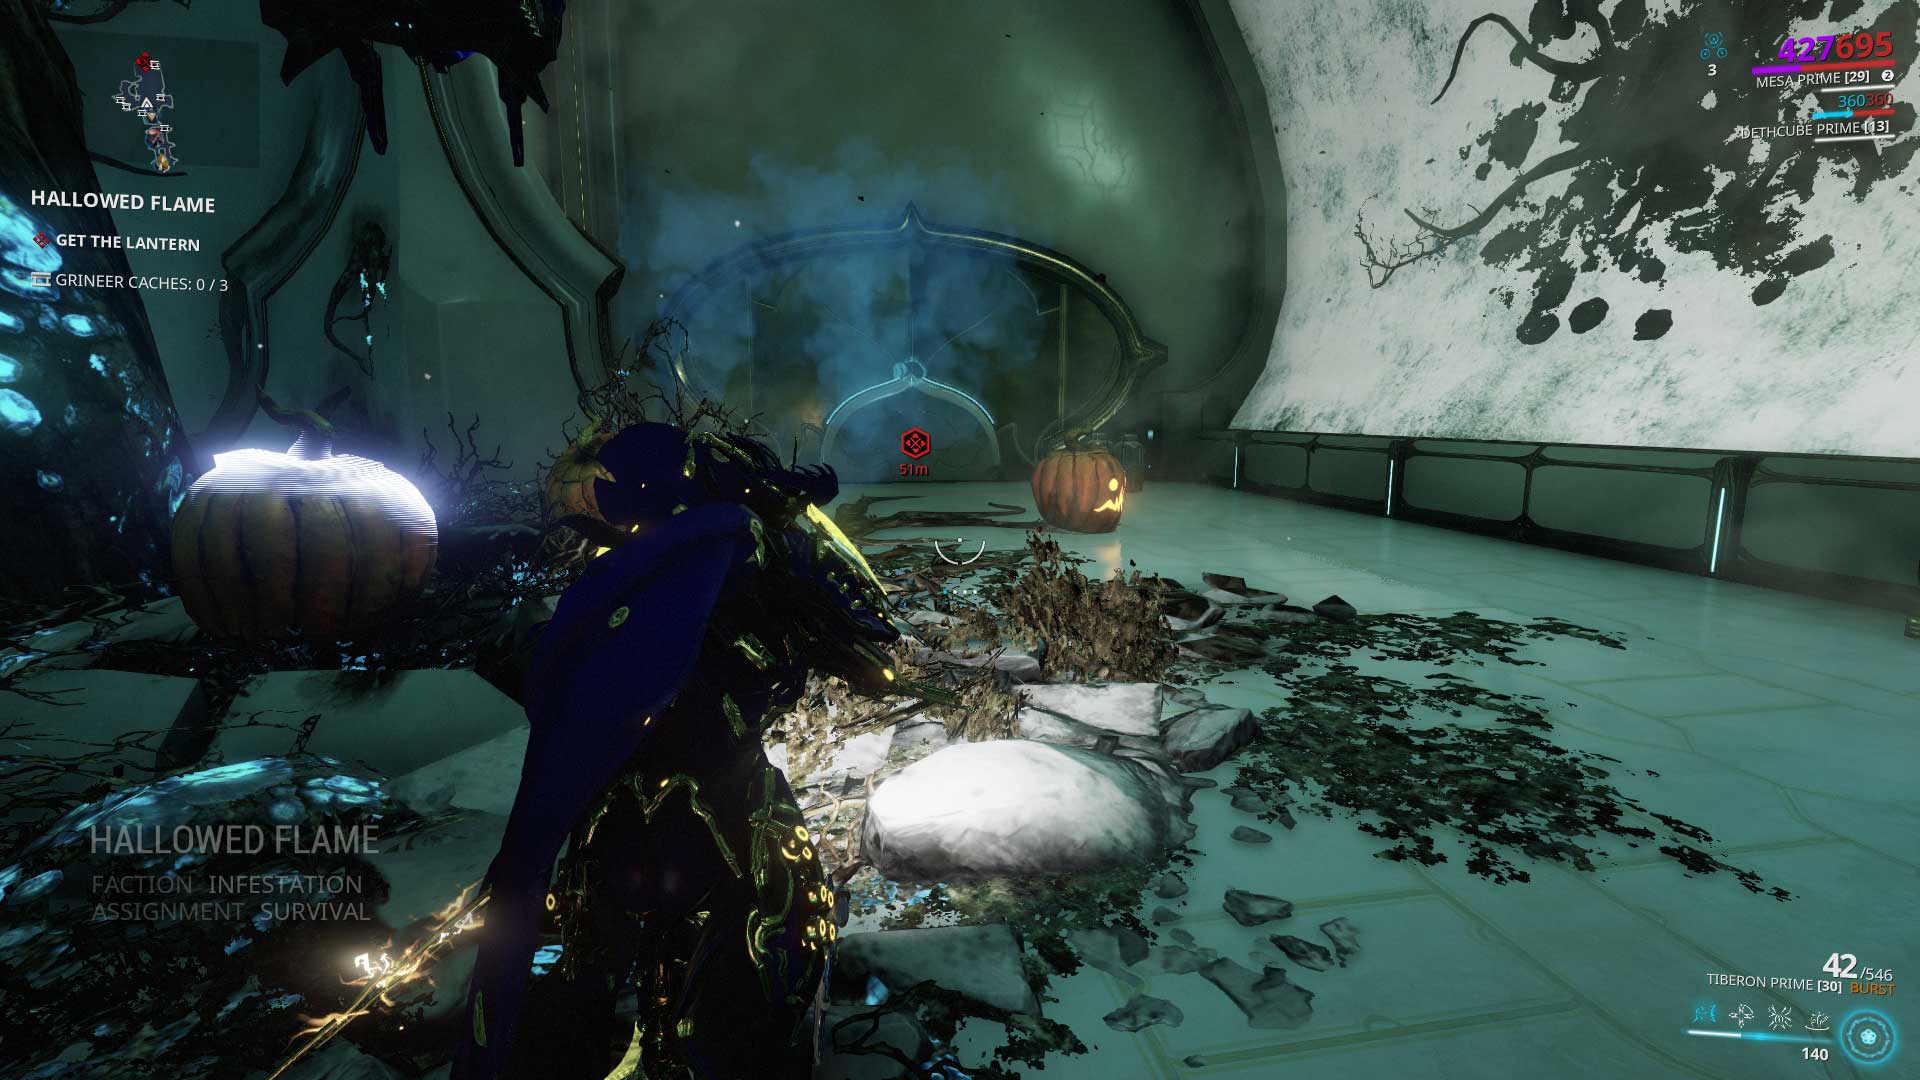 The Orokin derelict got spookier with the addition of pumpkins.